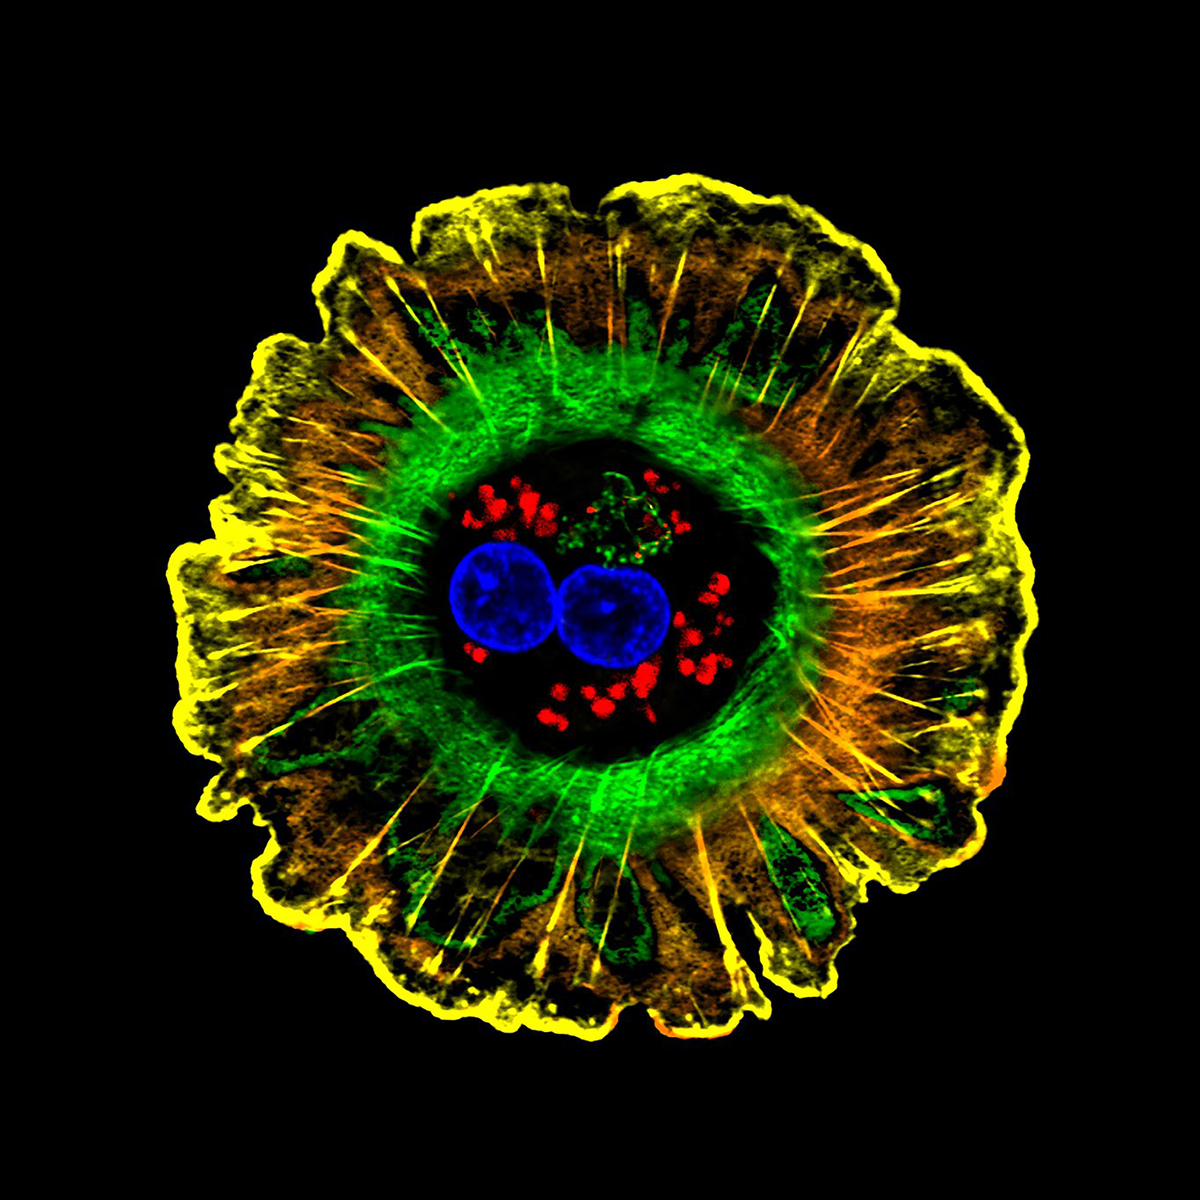 Single human liver cell on a black background.